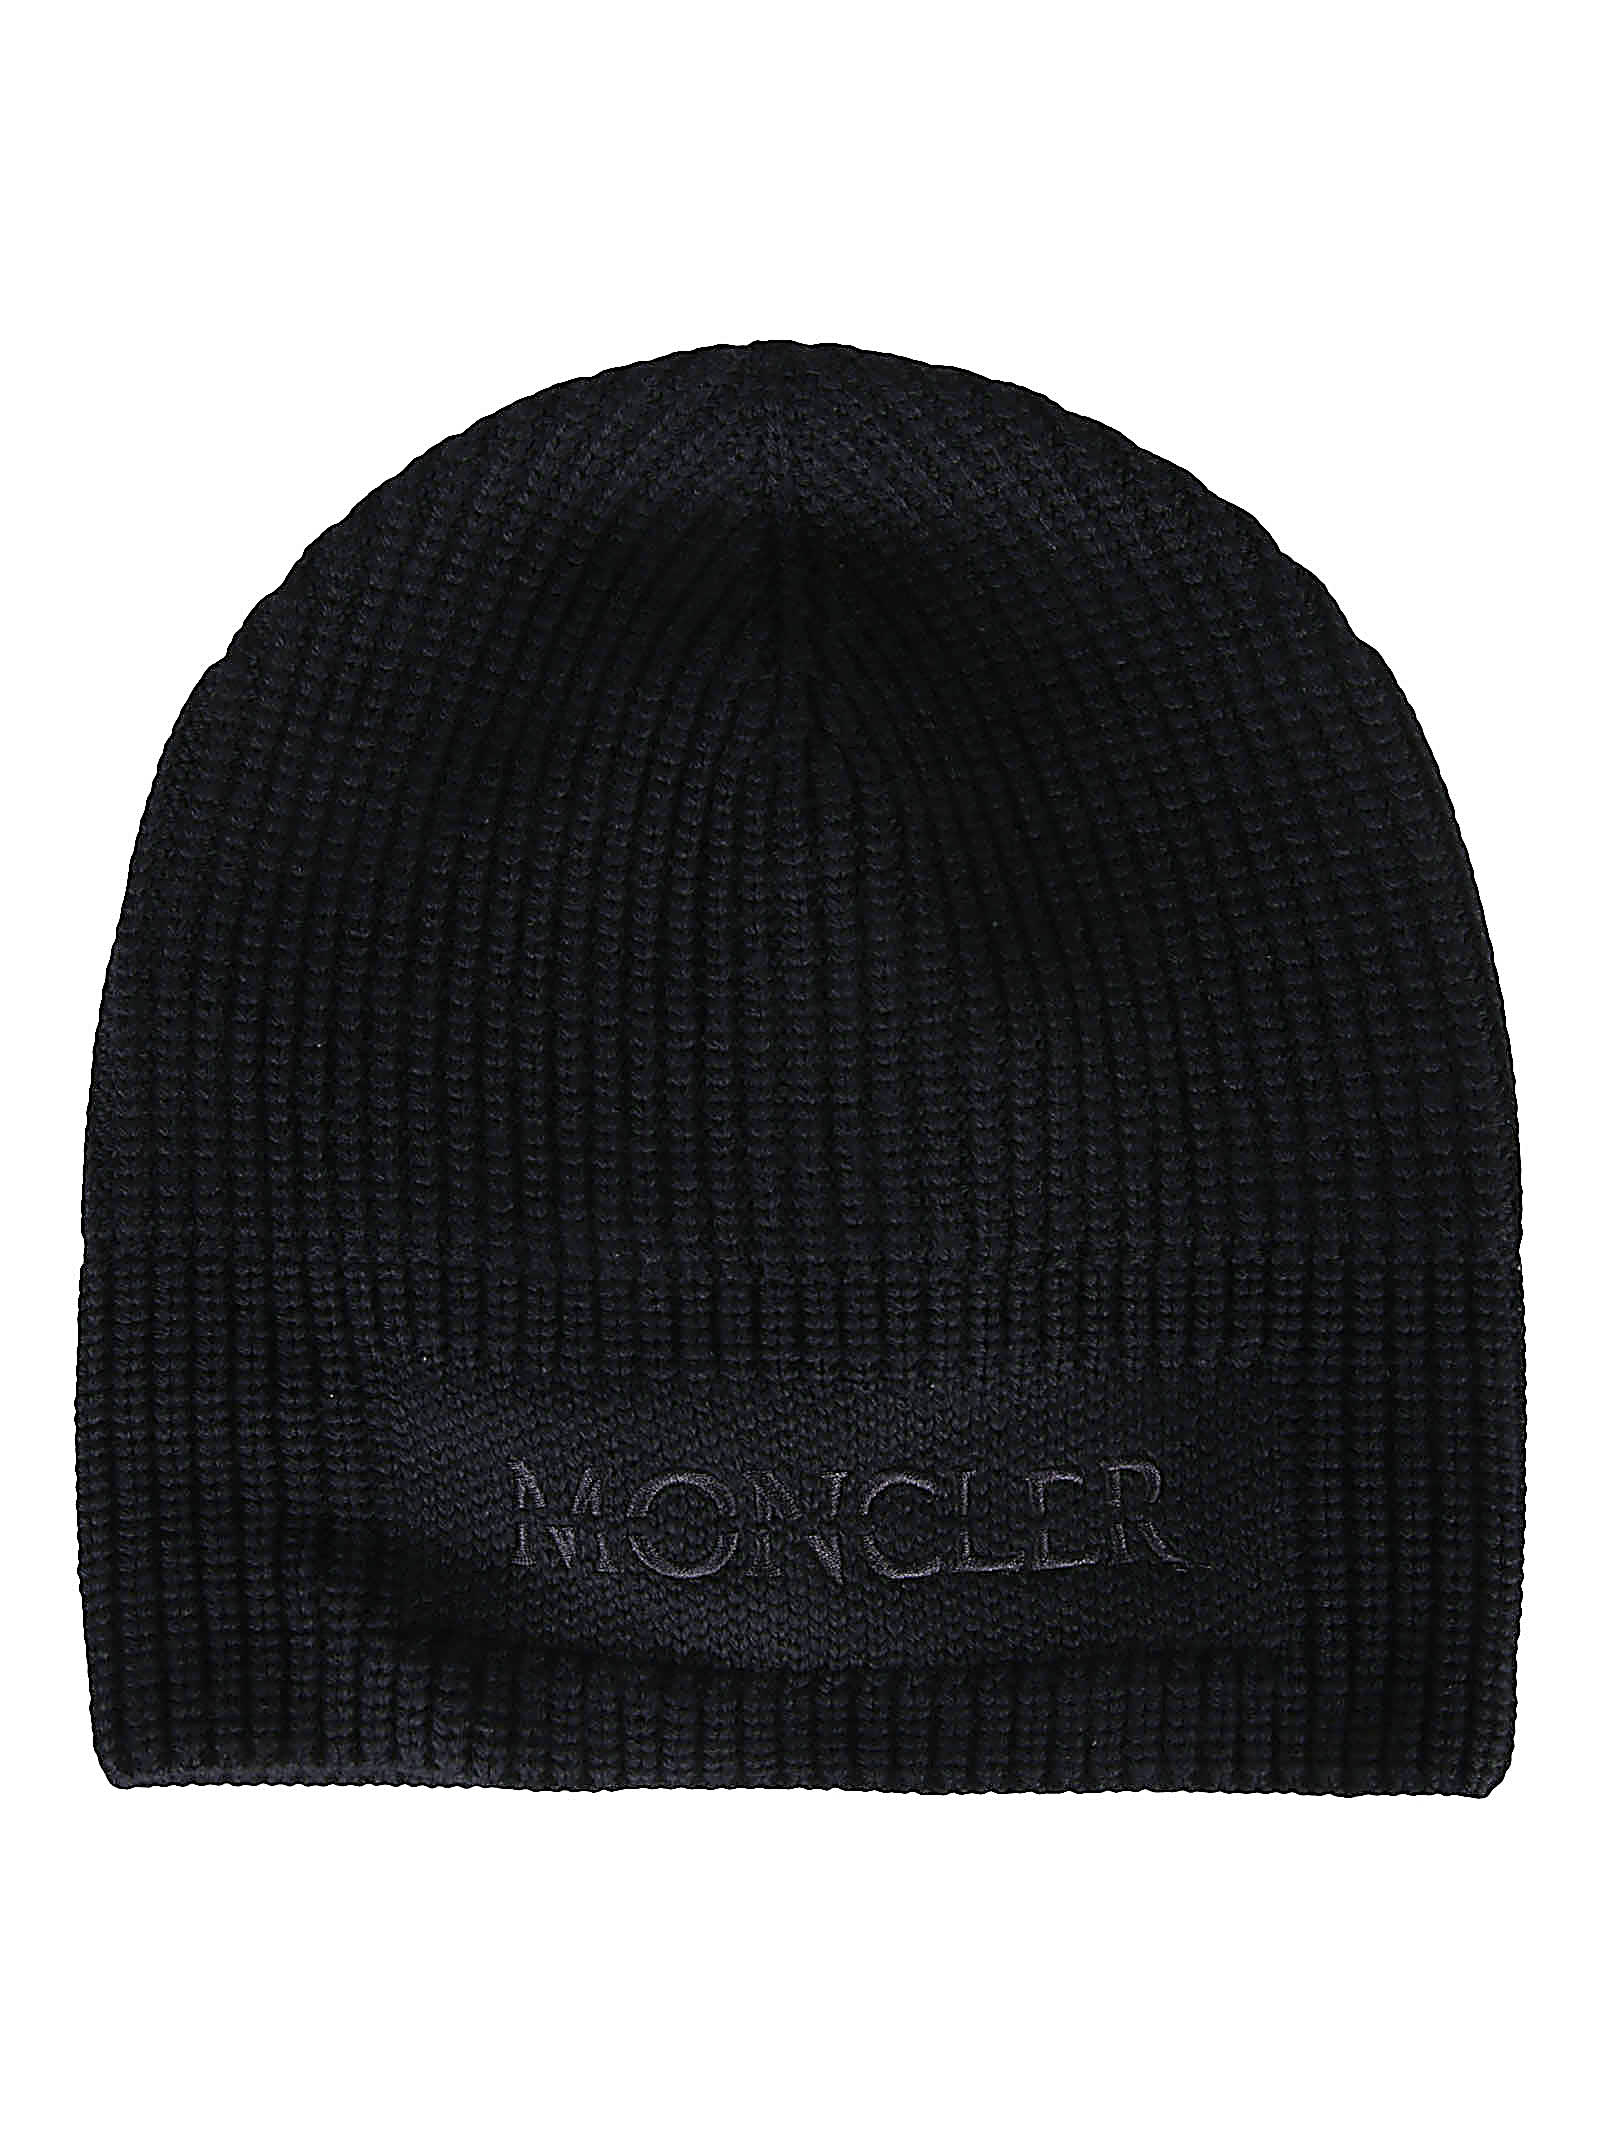 Moncler Logo Knitted Beanie